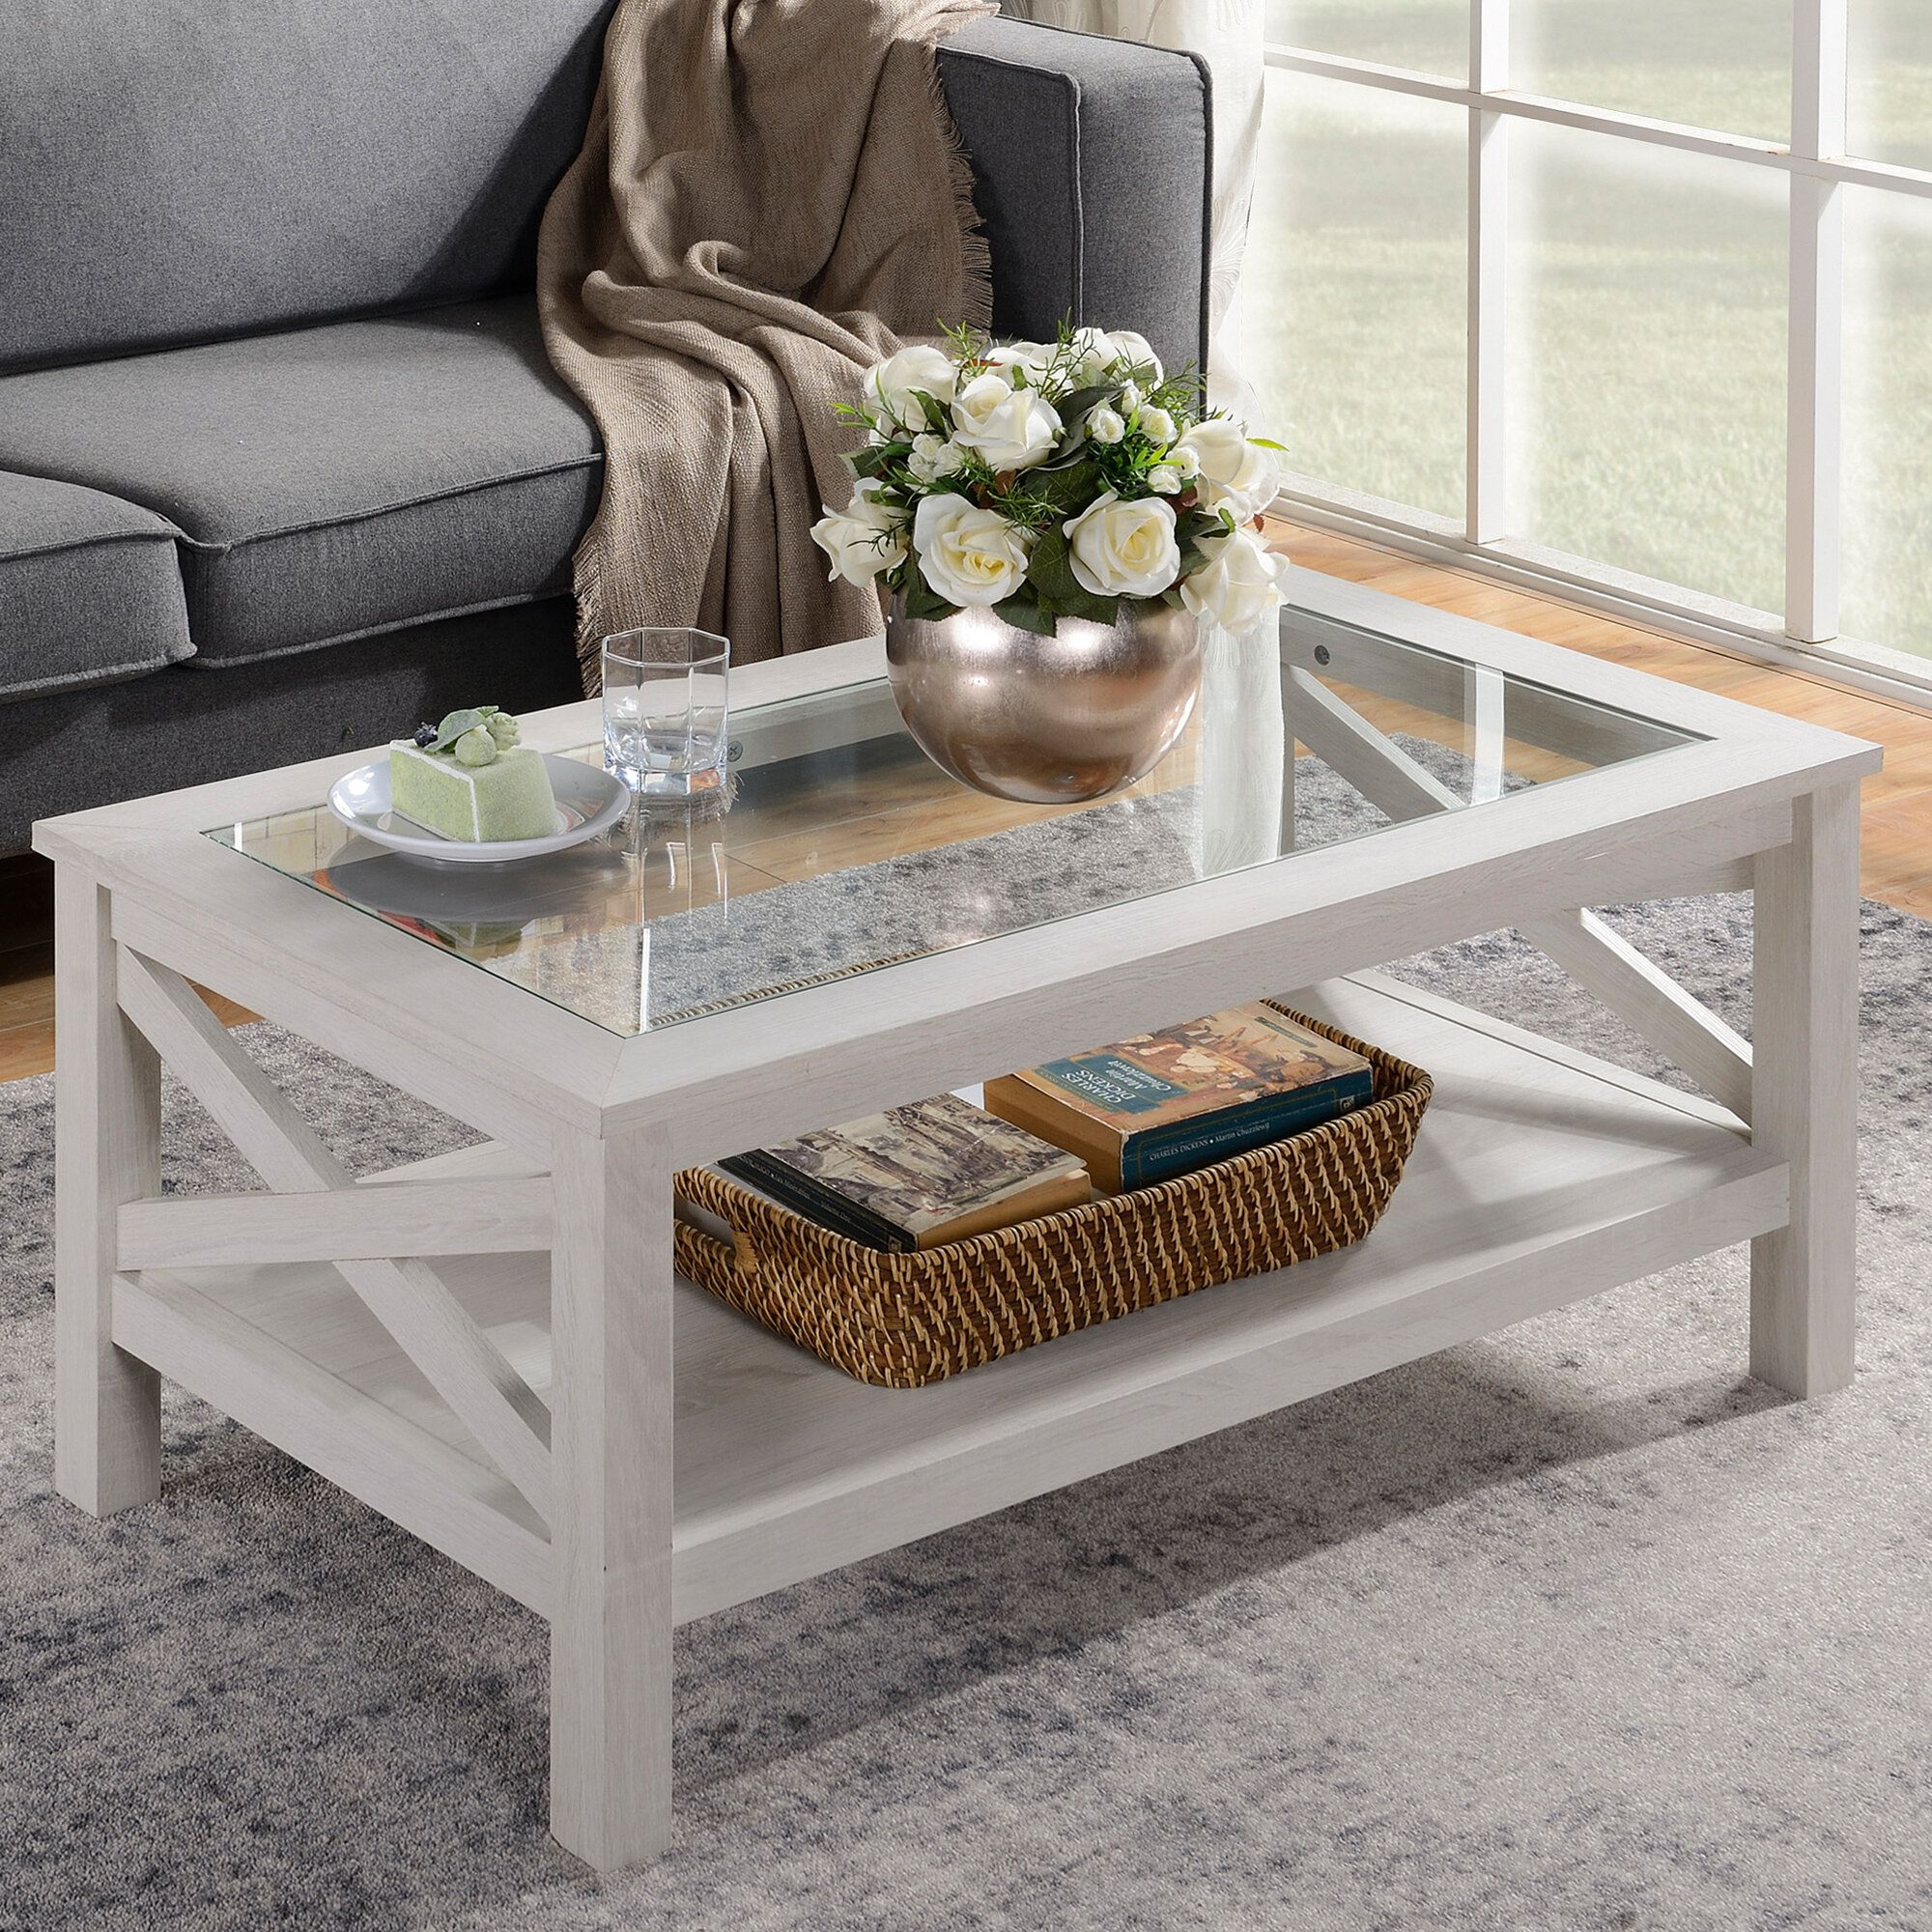 Gracie Oaks Espinet Traditional Coffee Table With Wood Frame, Tempered Glass  Tabletop And Underneath Storage Shelf, White Oak & Reviews | Wayfair In Tempered Glass Top Coffee Tables (View 3 of 20)